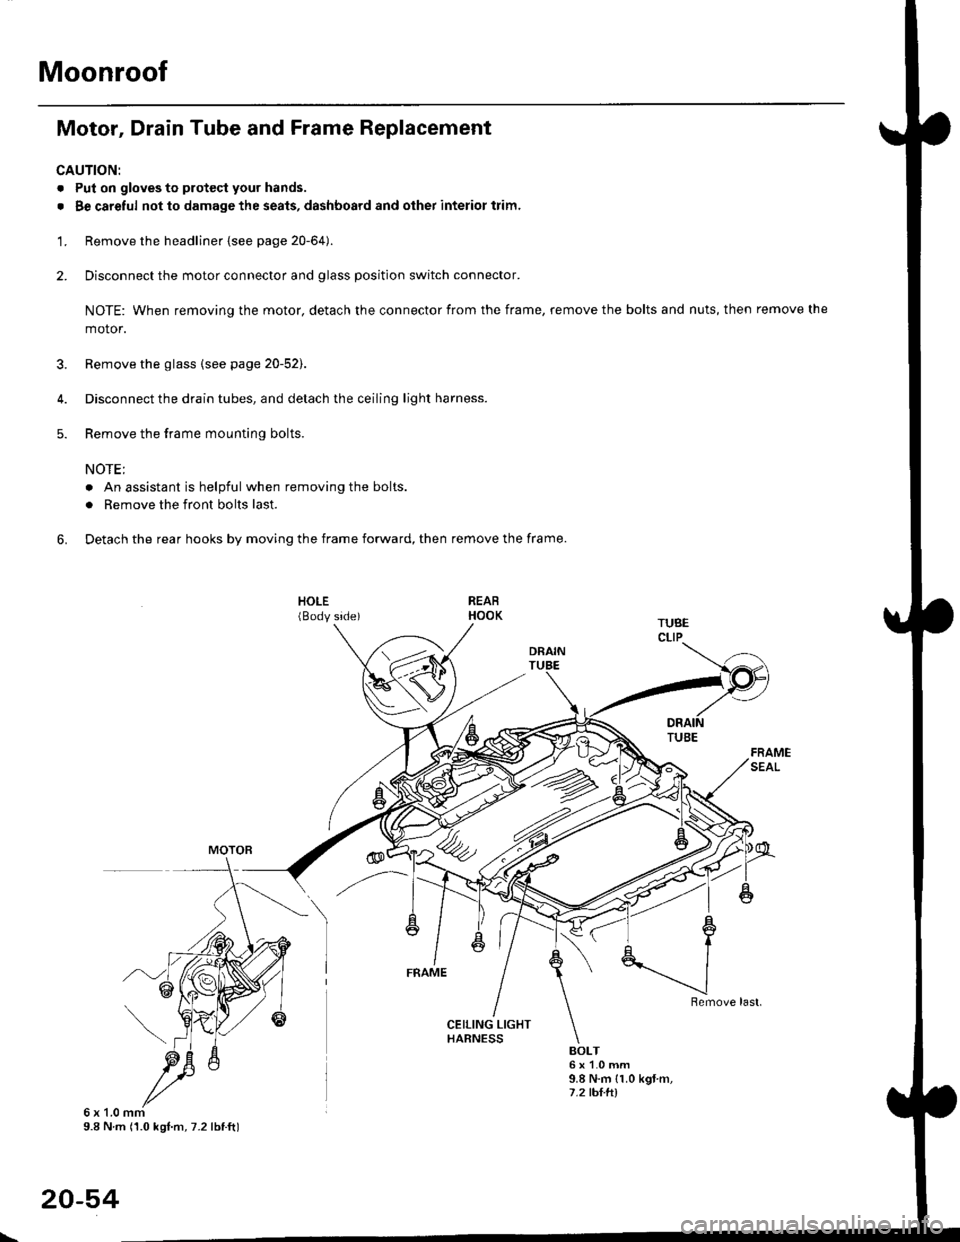 HONDA CIVIC 1996 6.G Workshop Manual Moonroof
Motor, Drain Tube and Frame Replacement
CAUTION:
. Put on gloves to protecl your hands.
. Be careful not to damage the seats, dashboard and other interior trim.
1. Remove the headliner {see 